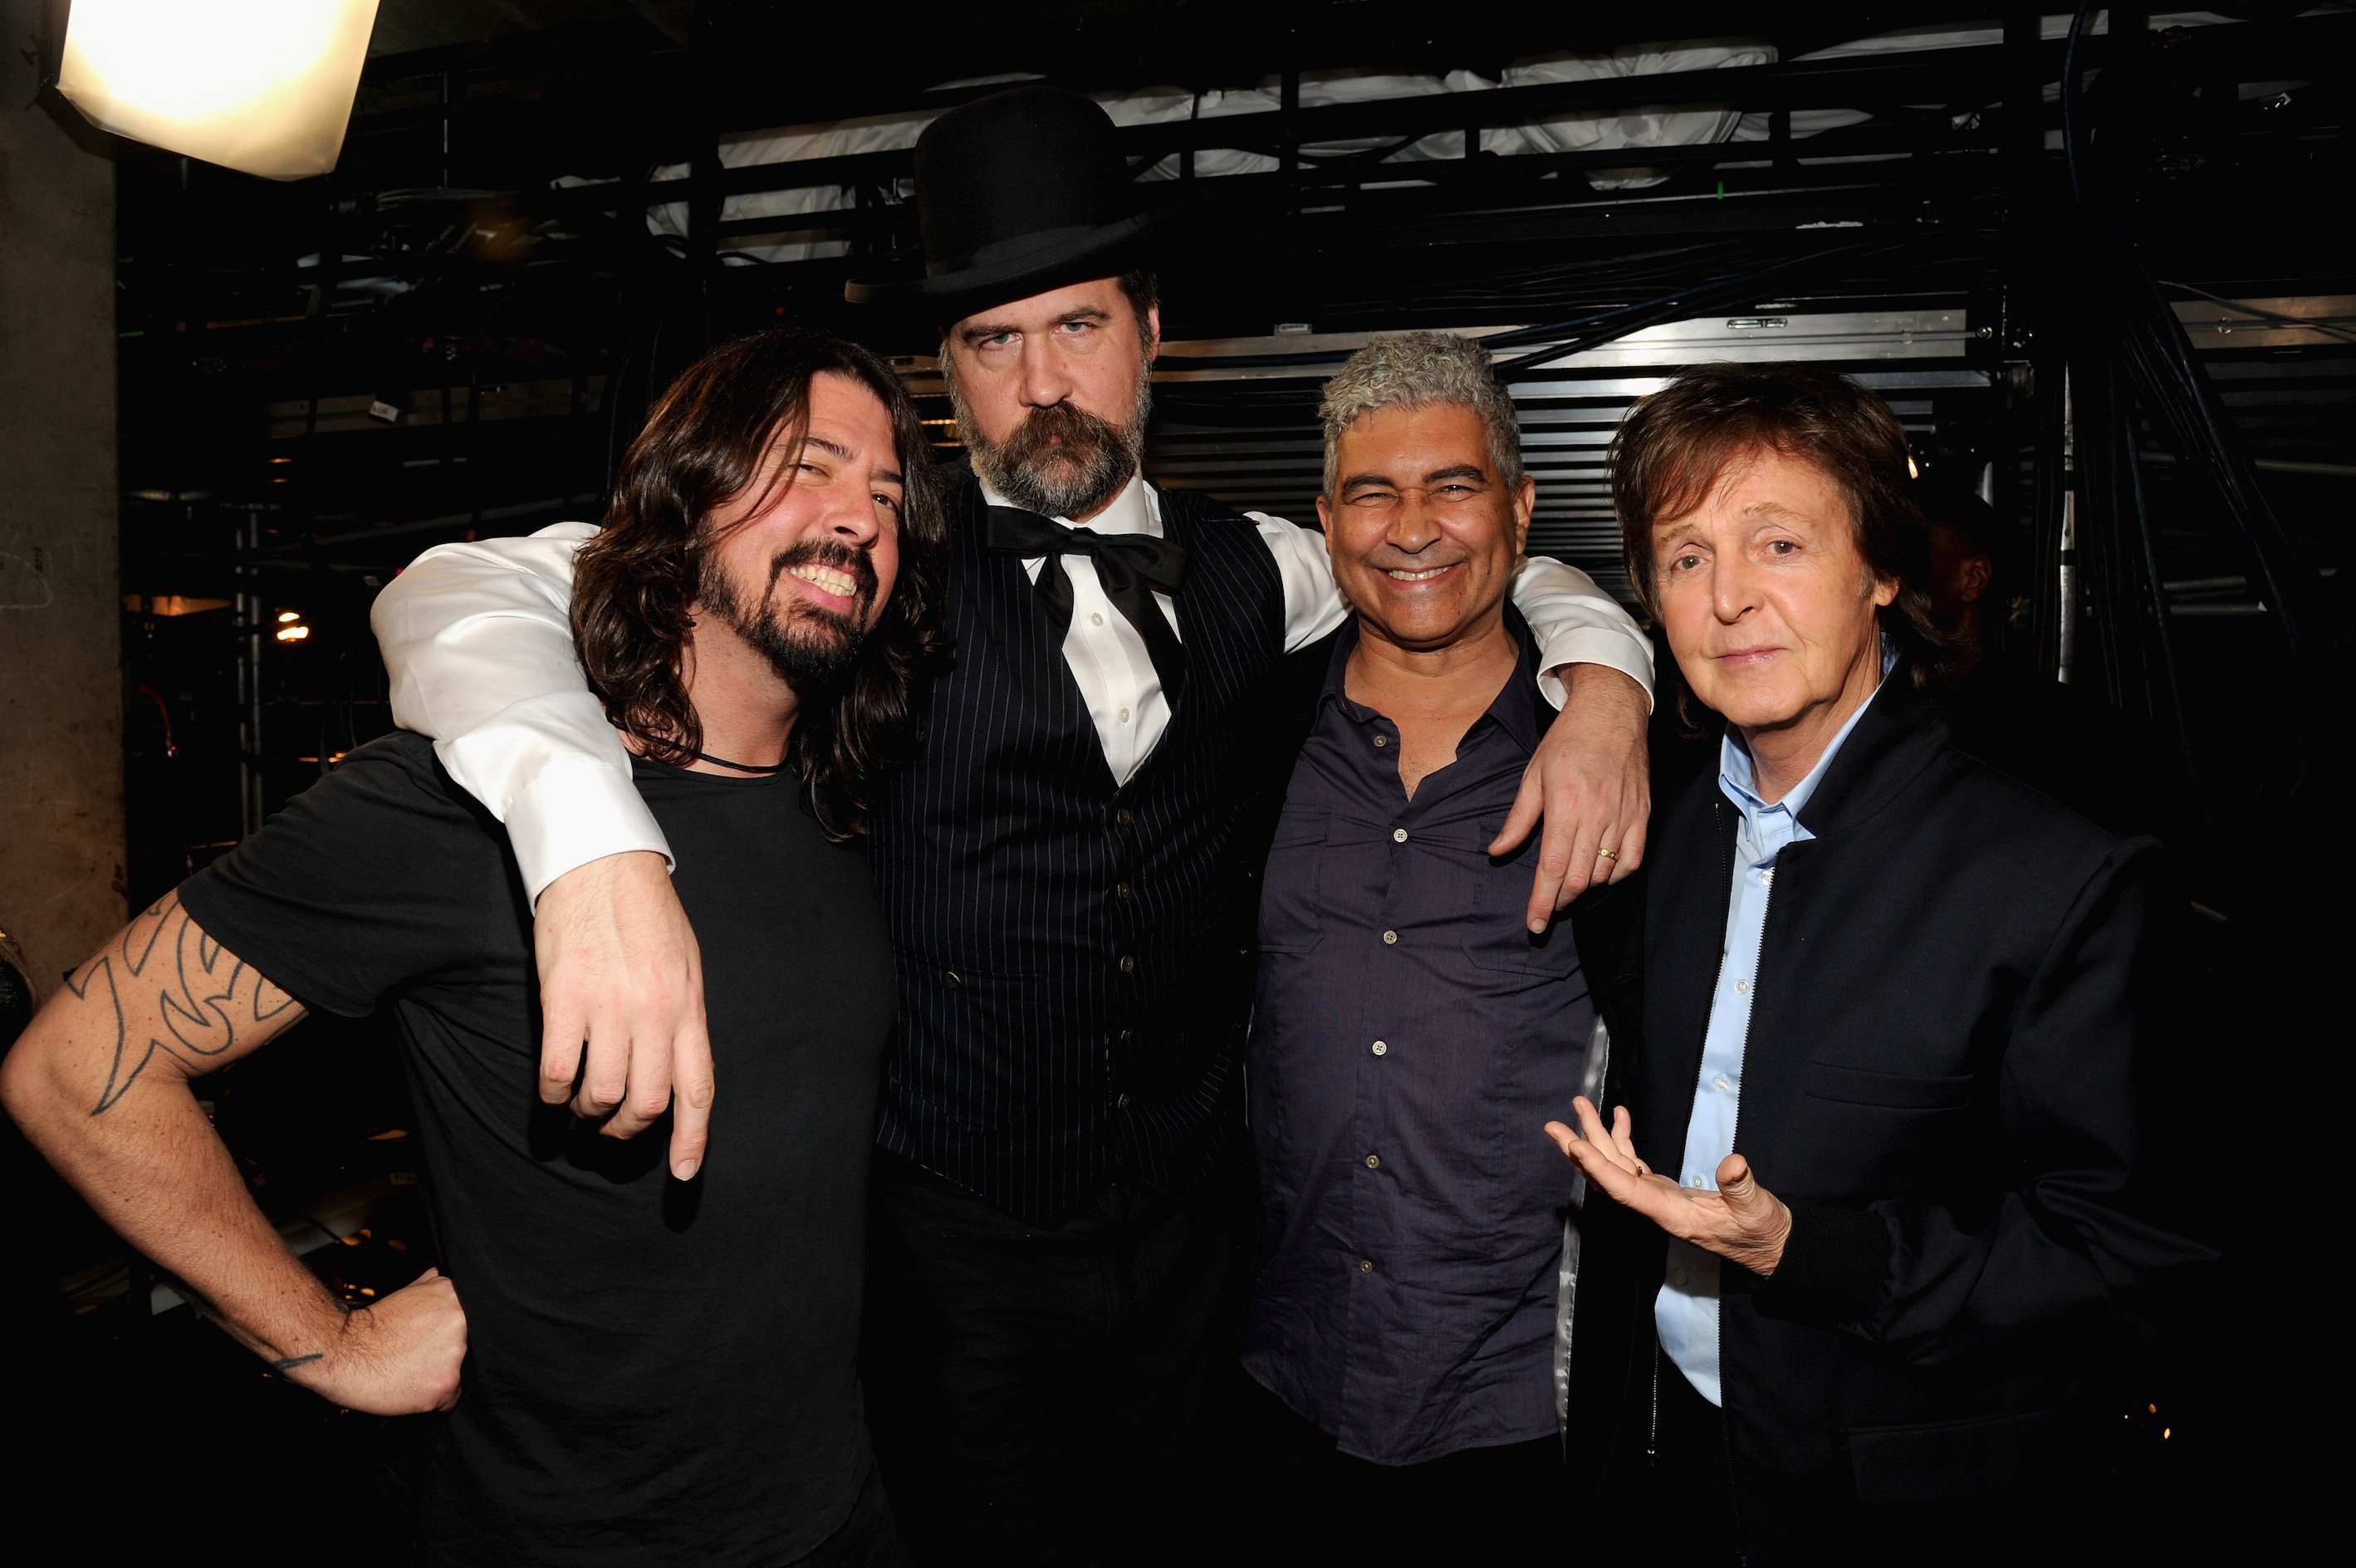 Paul McCartney attends the 56th Grammy Awards with the members of Nirvana